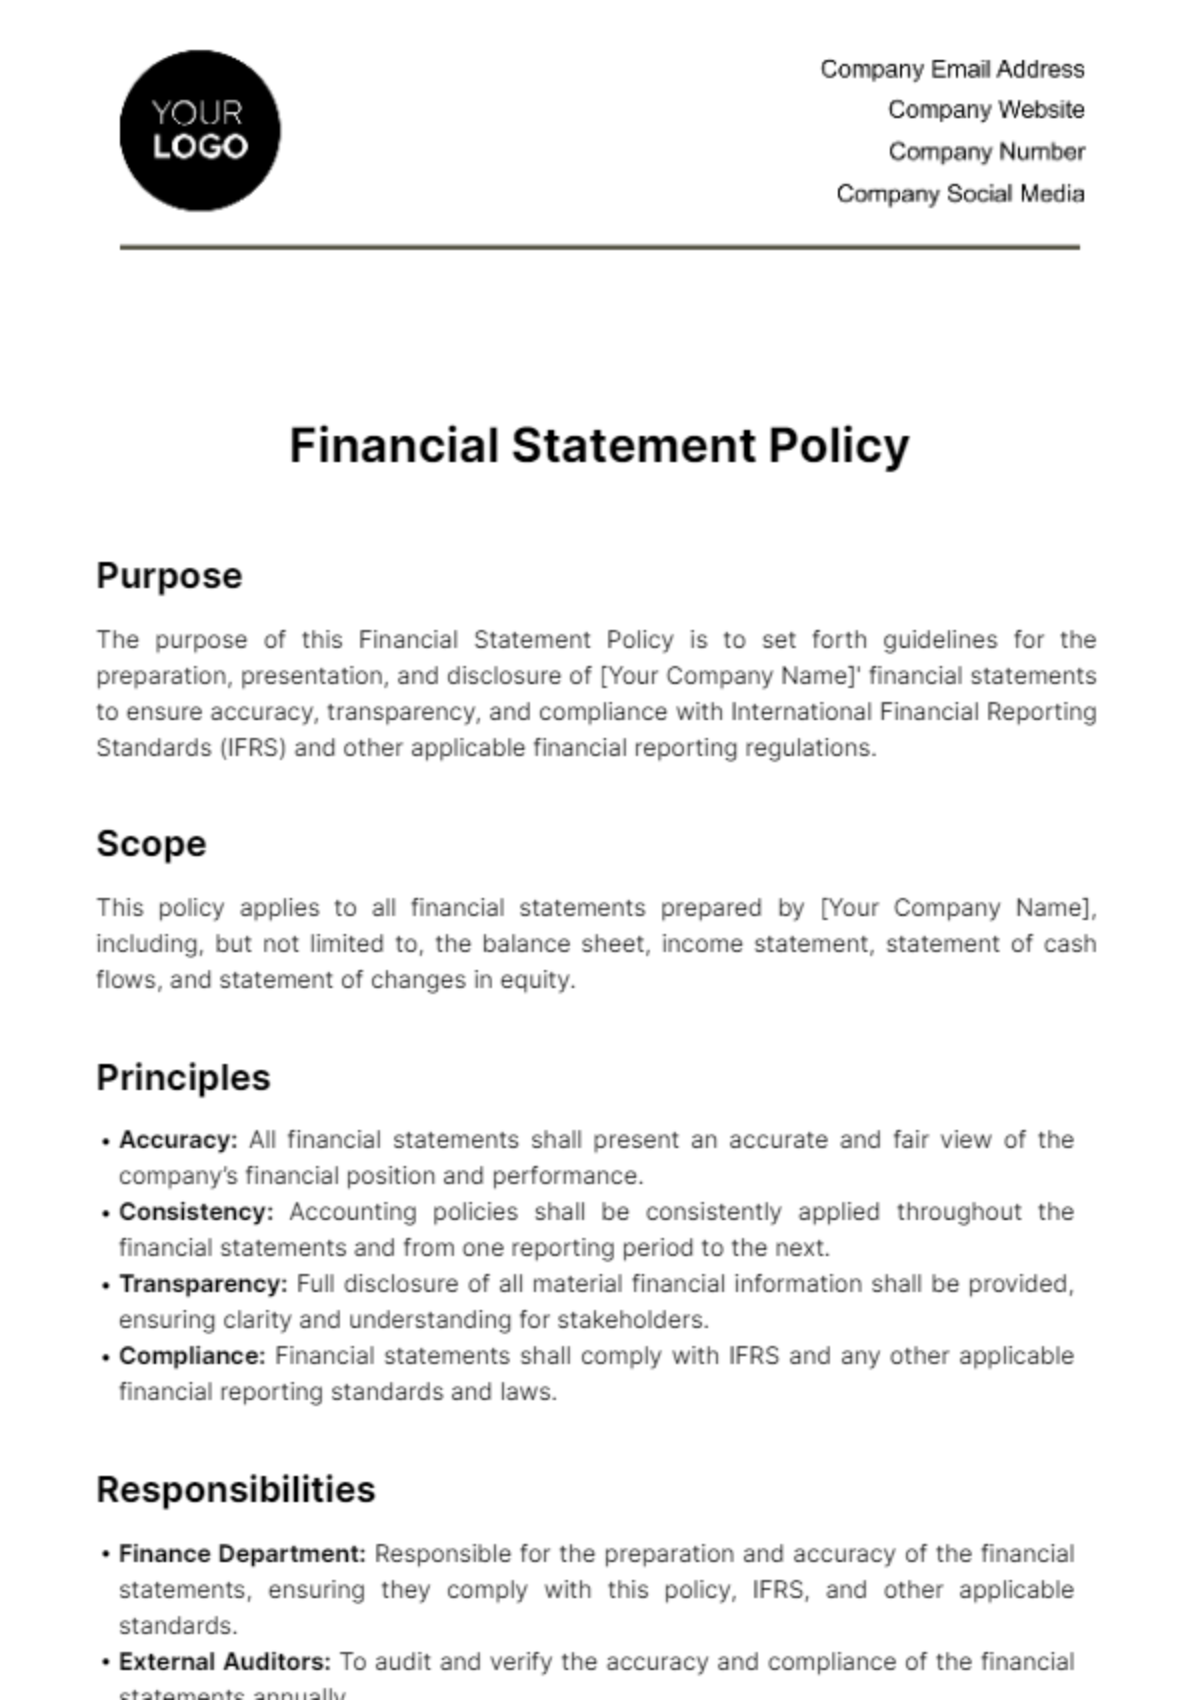 Free Financial Statement Policy Template